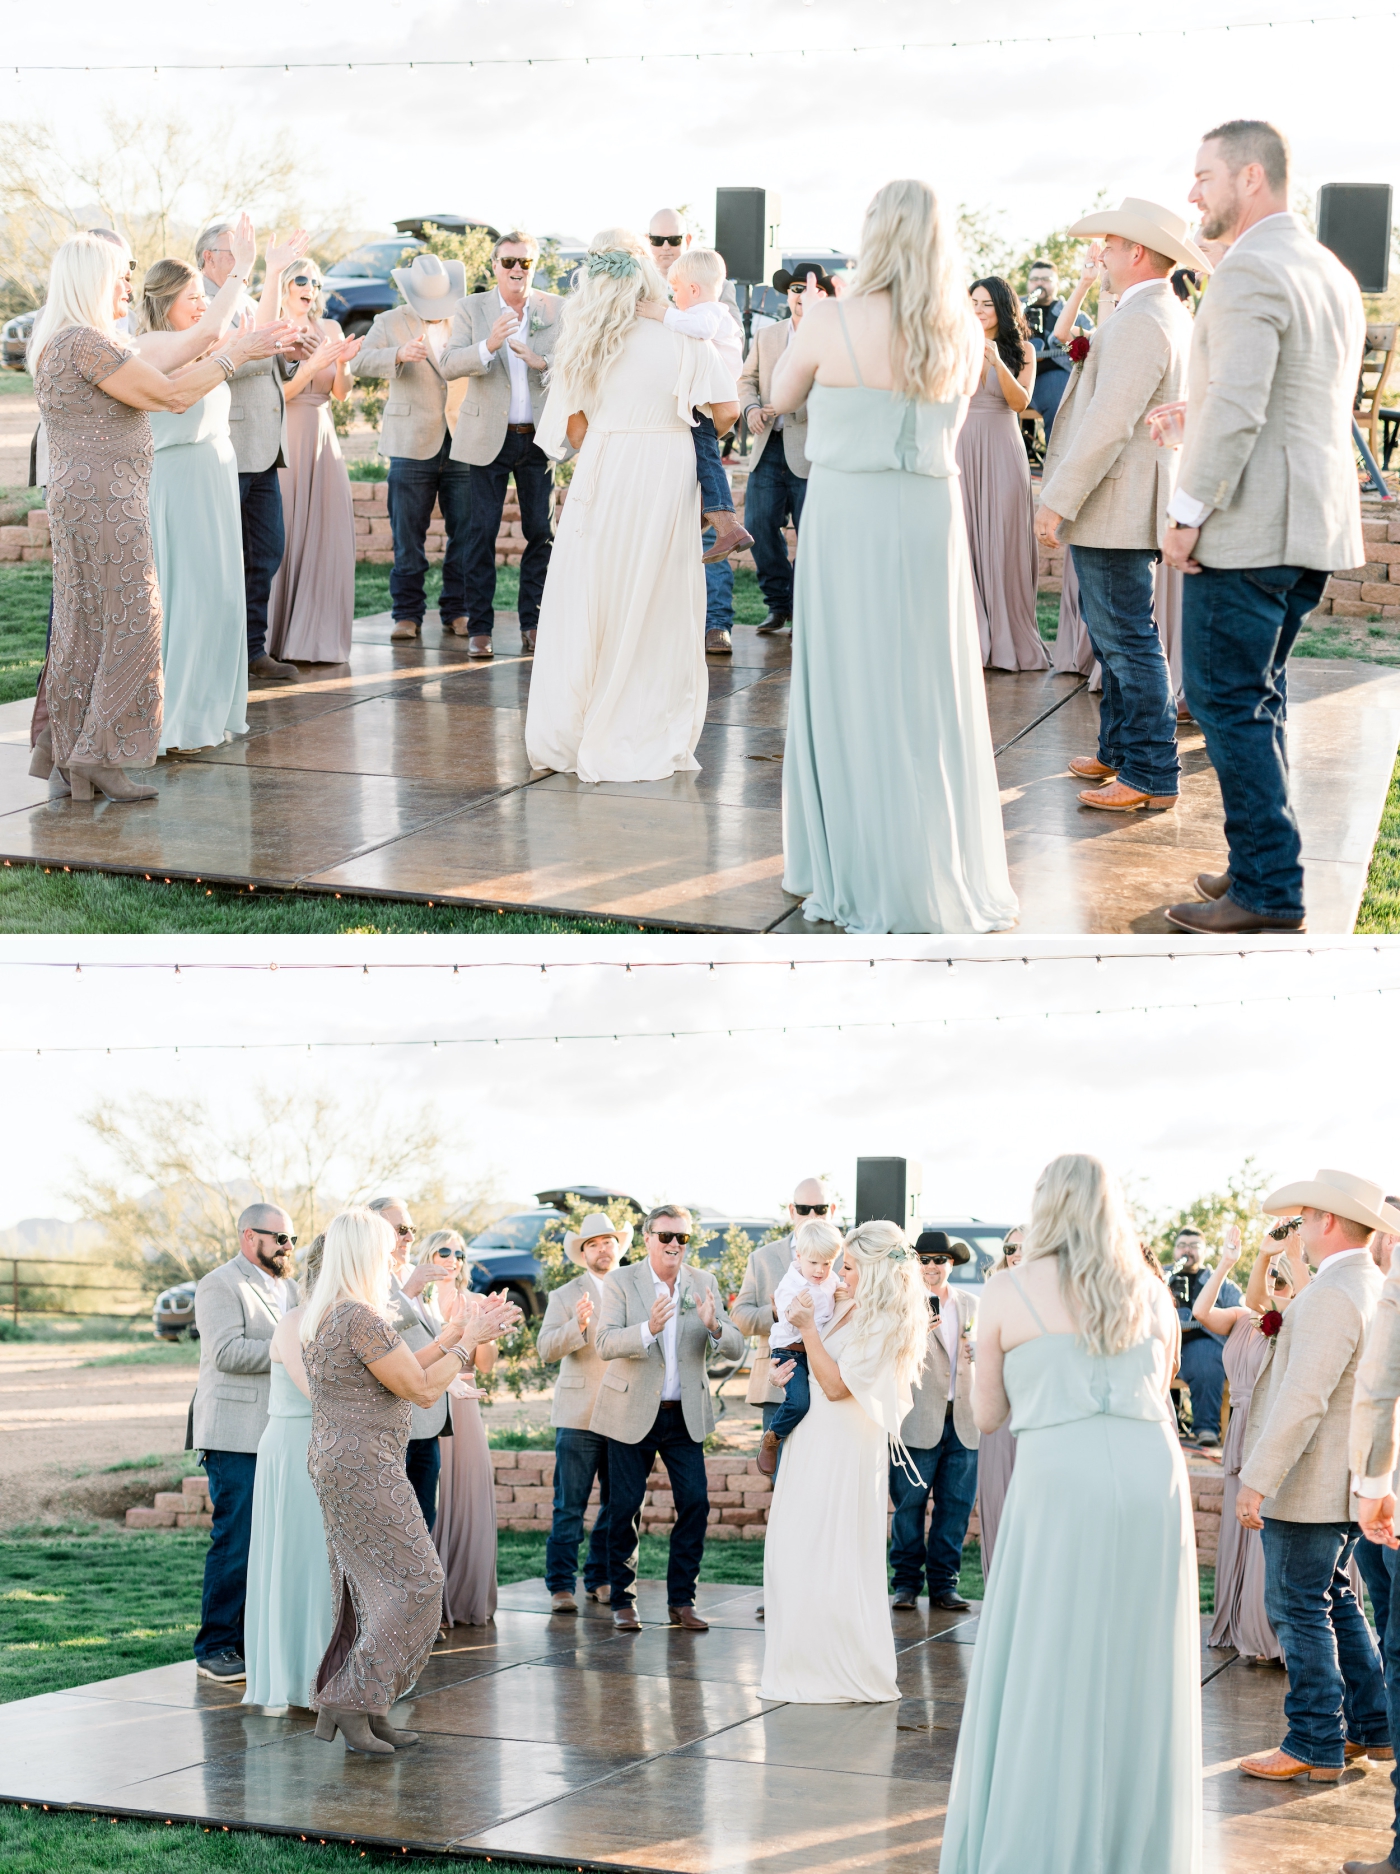 How to plan a desert wedding with bohemian style